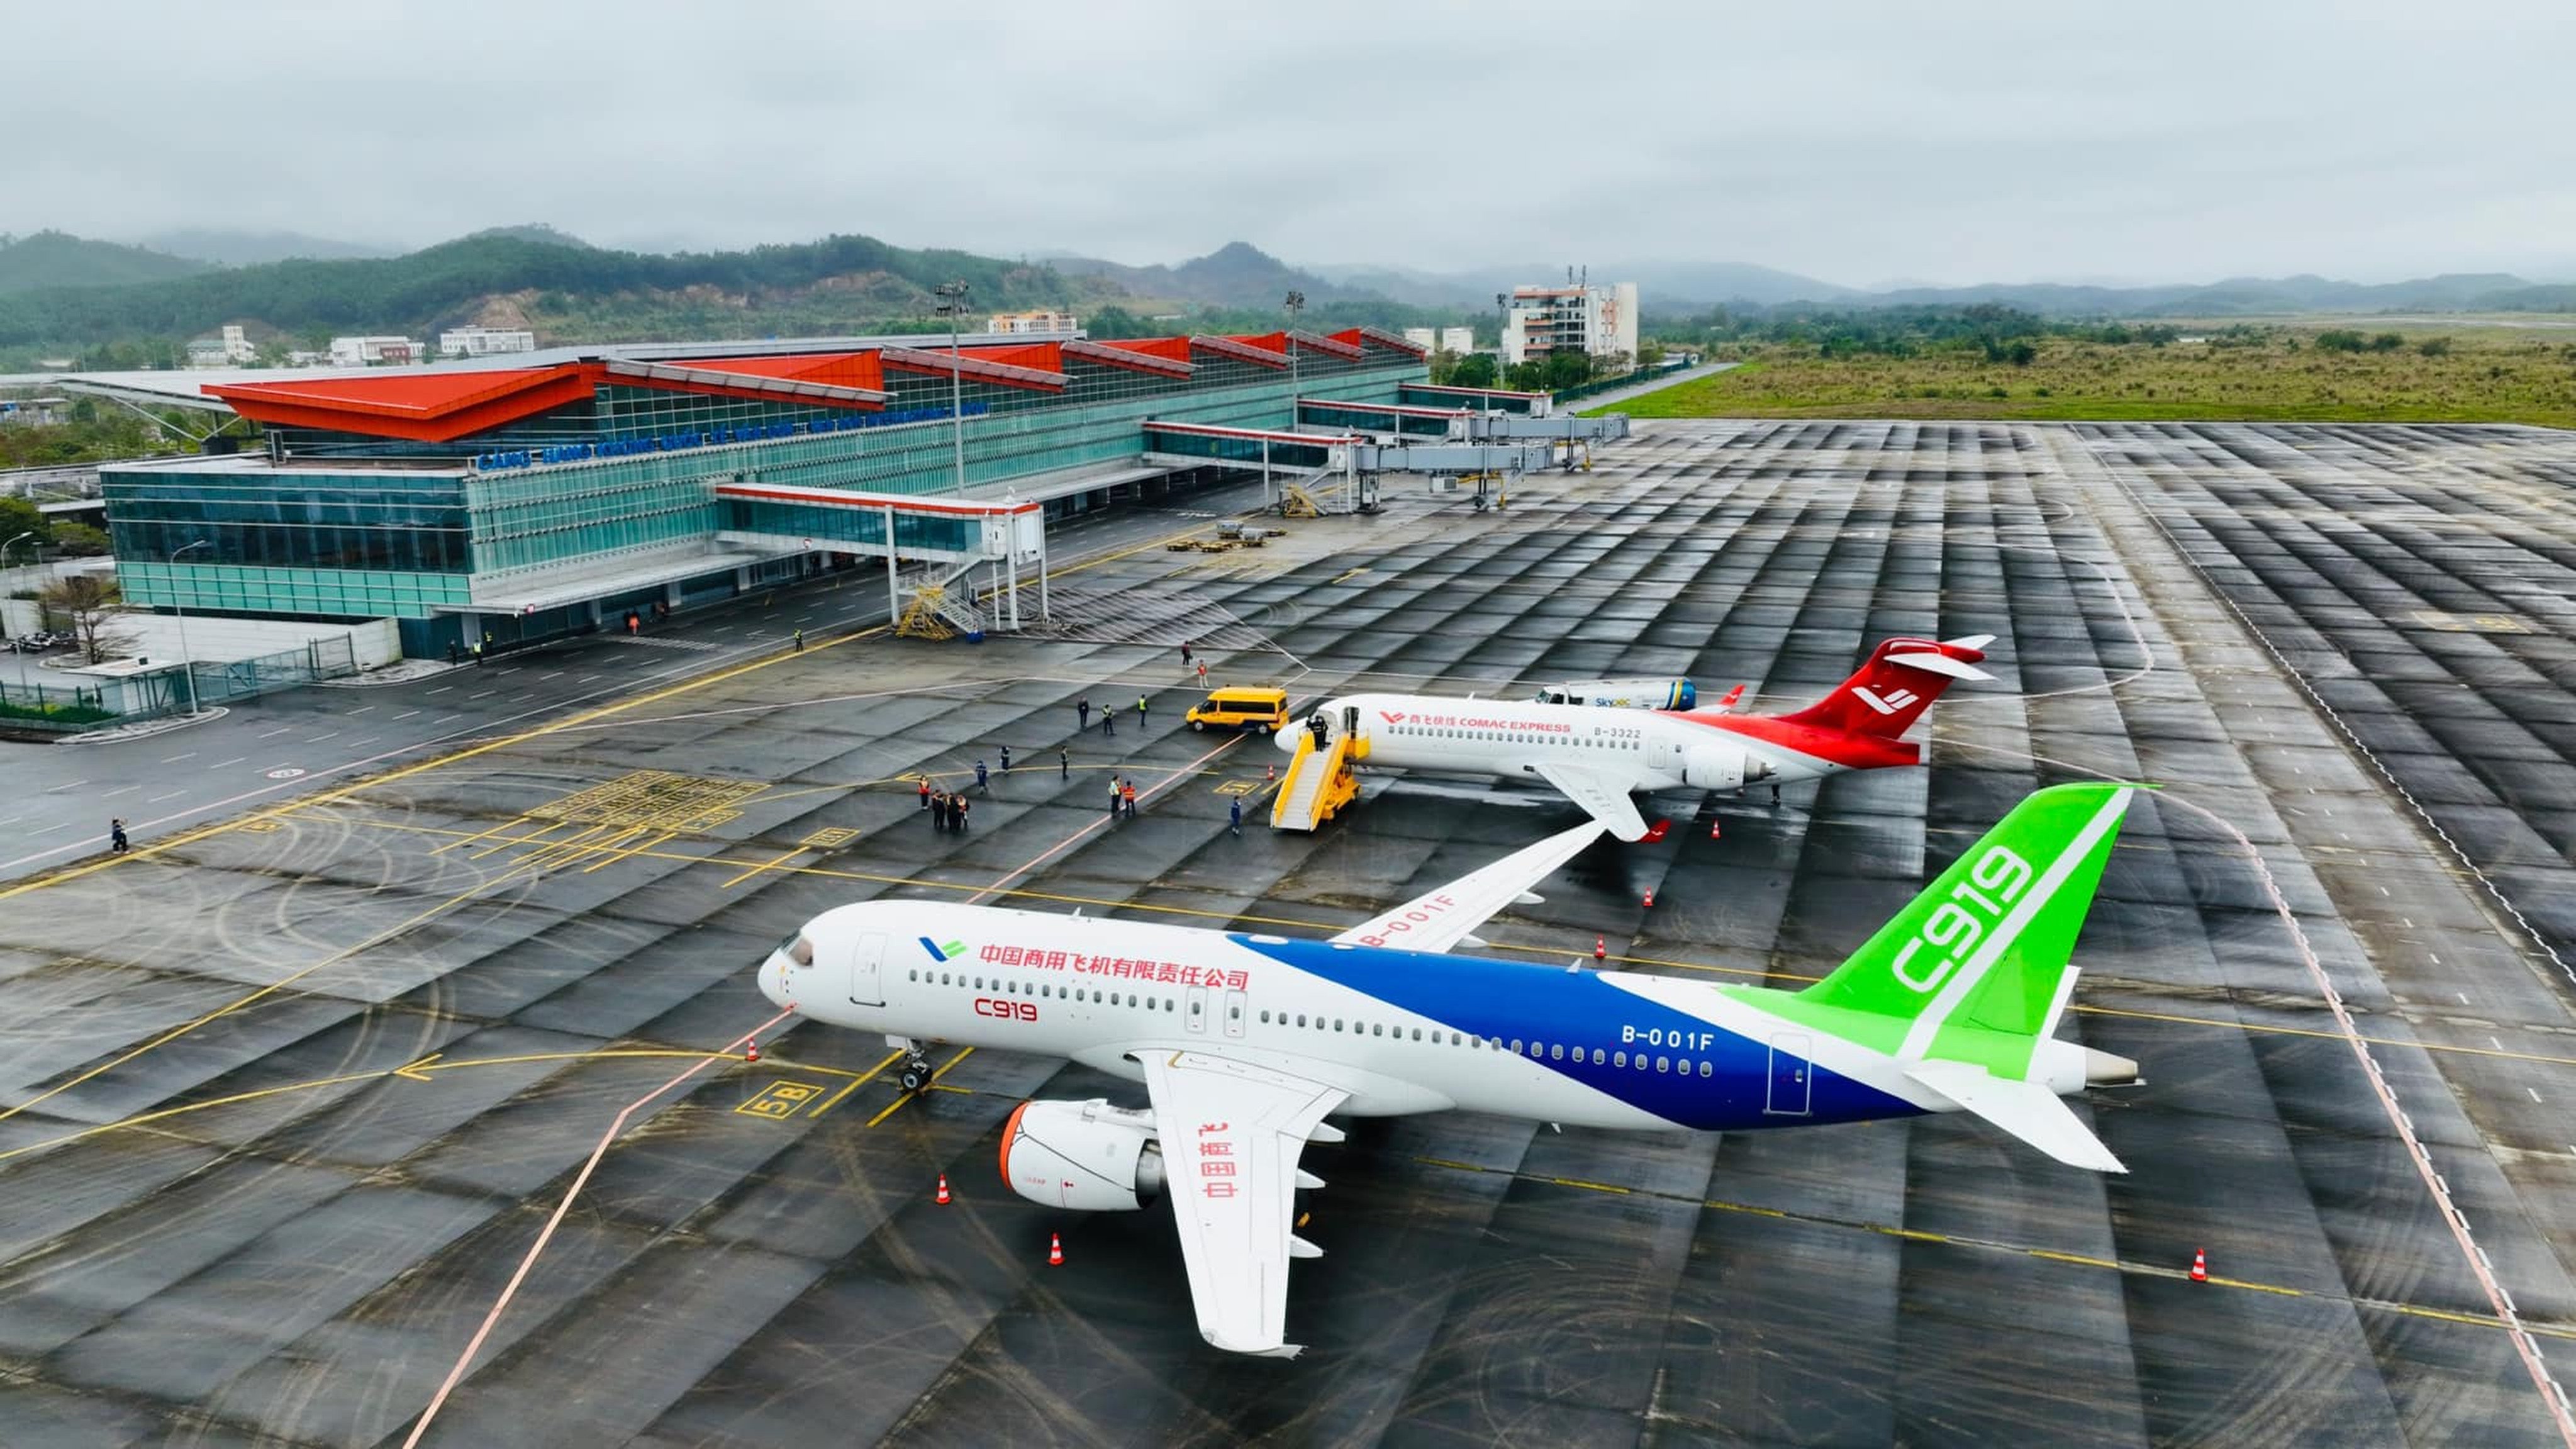 China’s C919 (front) and ARJ21 aircraft are seen at the Van Don International Airport this week as a two-week marketing campaign kicked off in Vietnam. Photo: Facebook/Van Don International Airport